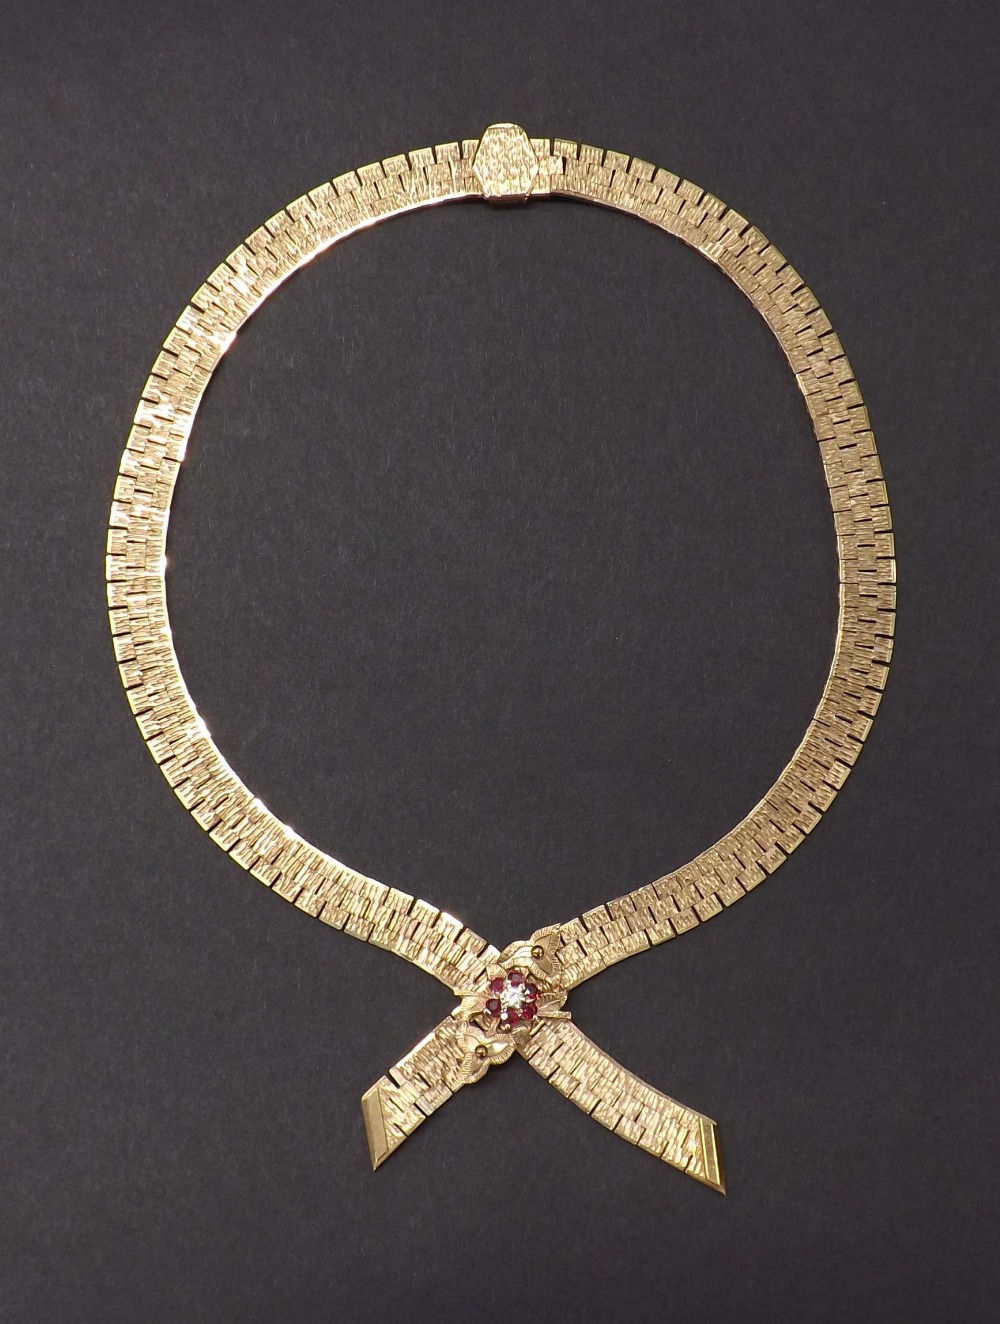 9ct necklace set with a diamond and ruby cluster, 56.1gm - Image 2 of 2